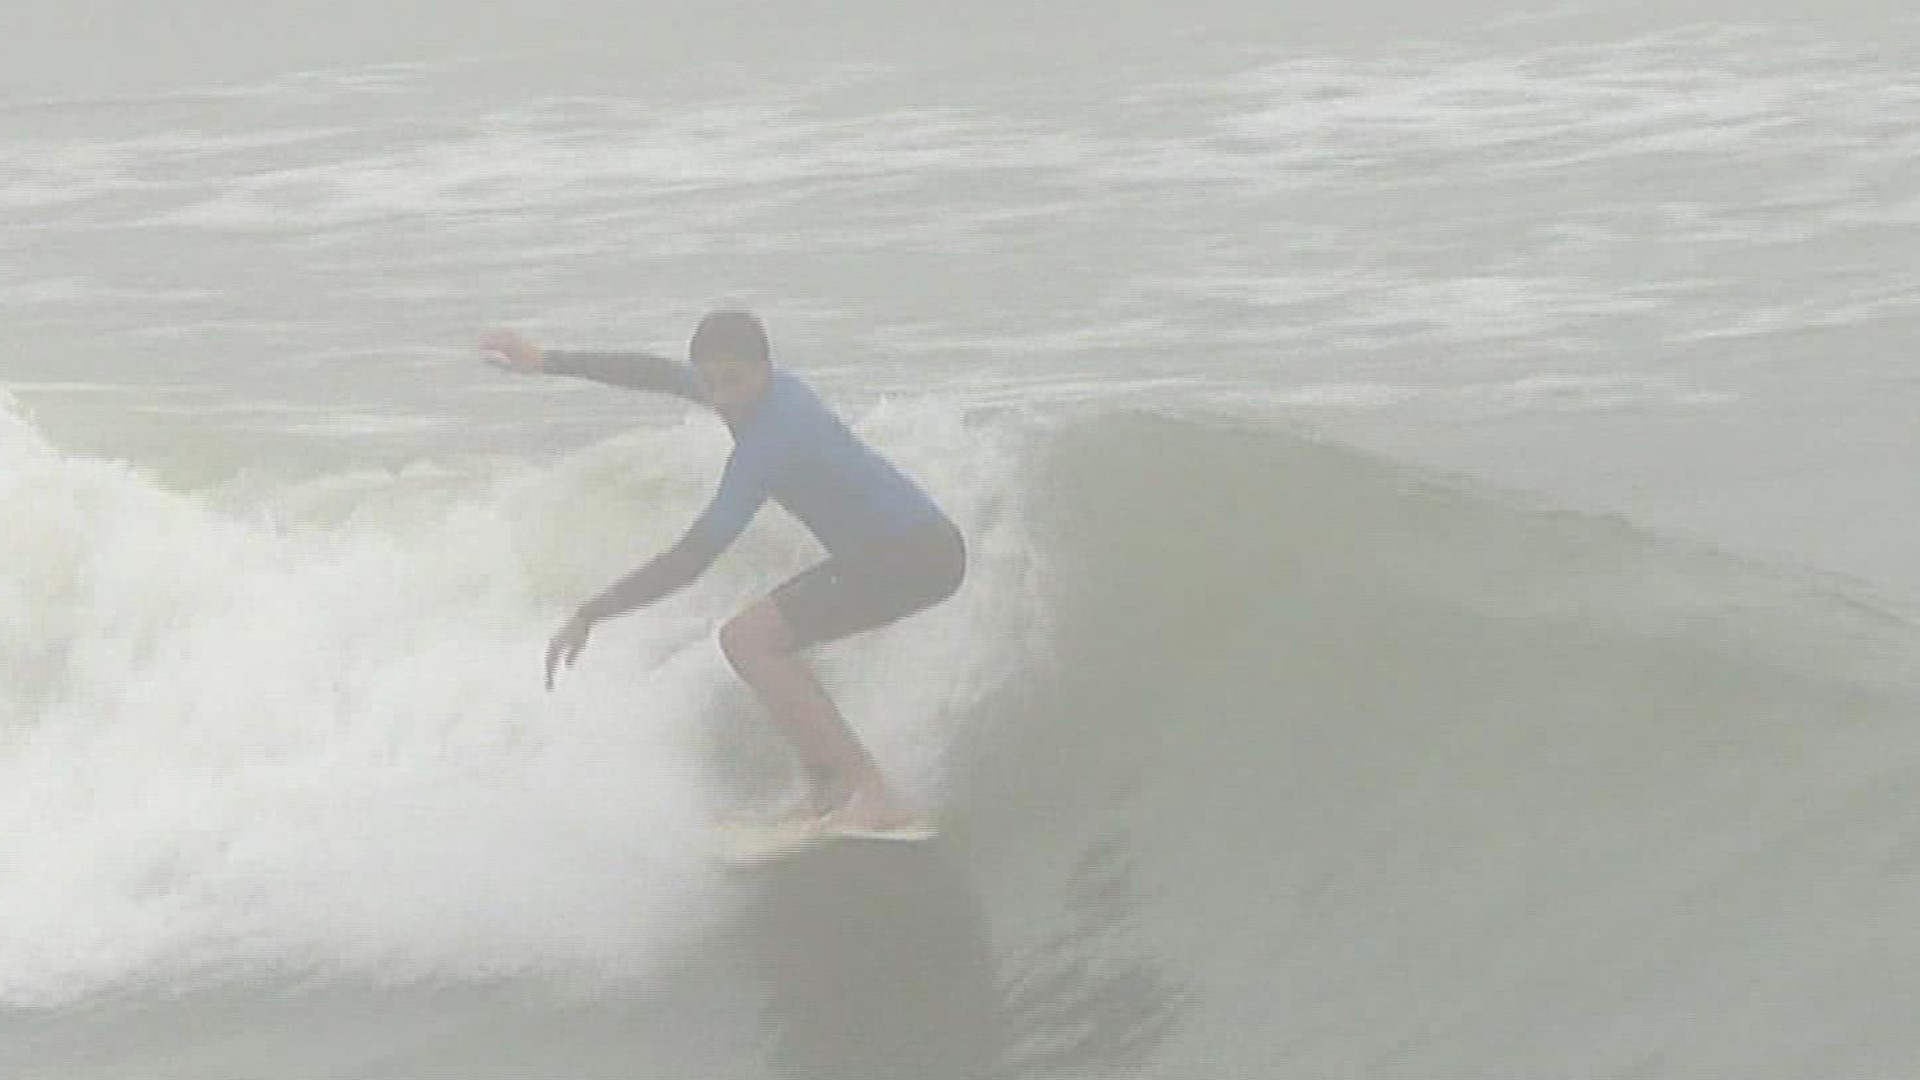 Surfers say the new pier design could impact the quality of waves in the area.